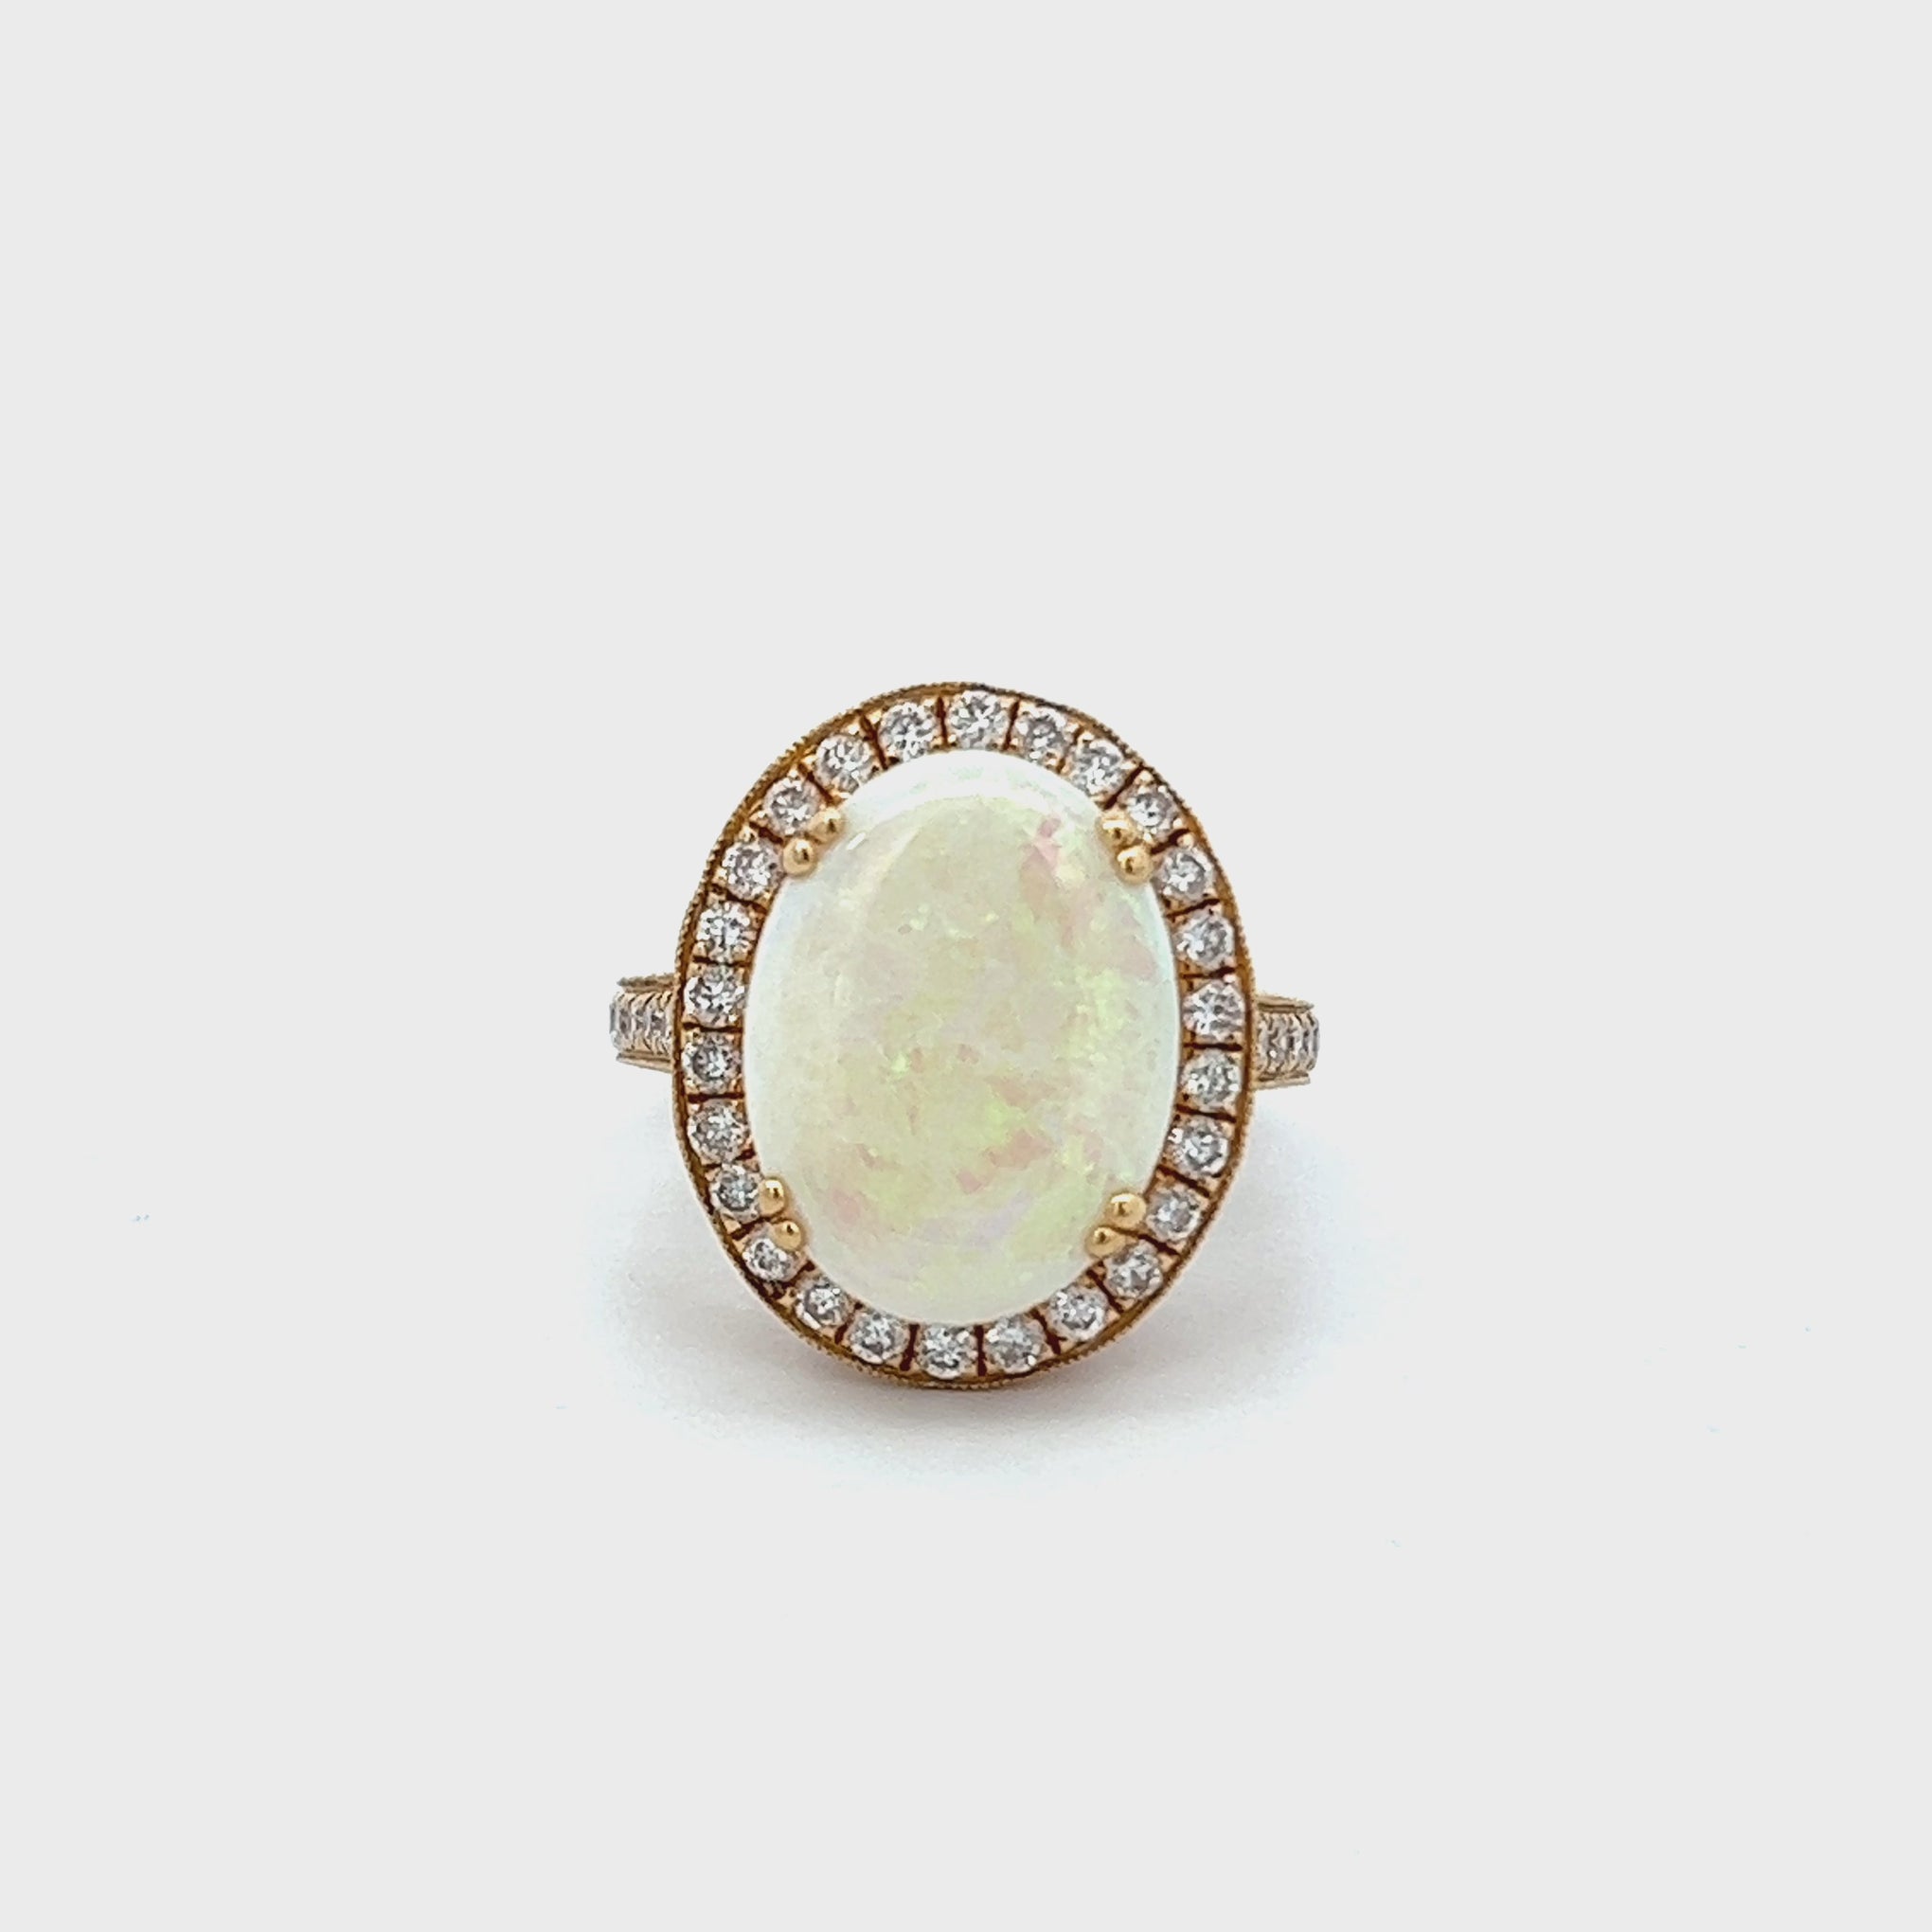 14KT Yellow Gold Round Cut Diamond And Opal Ring